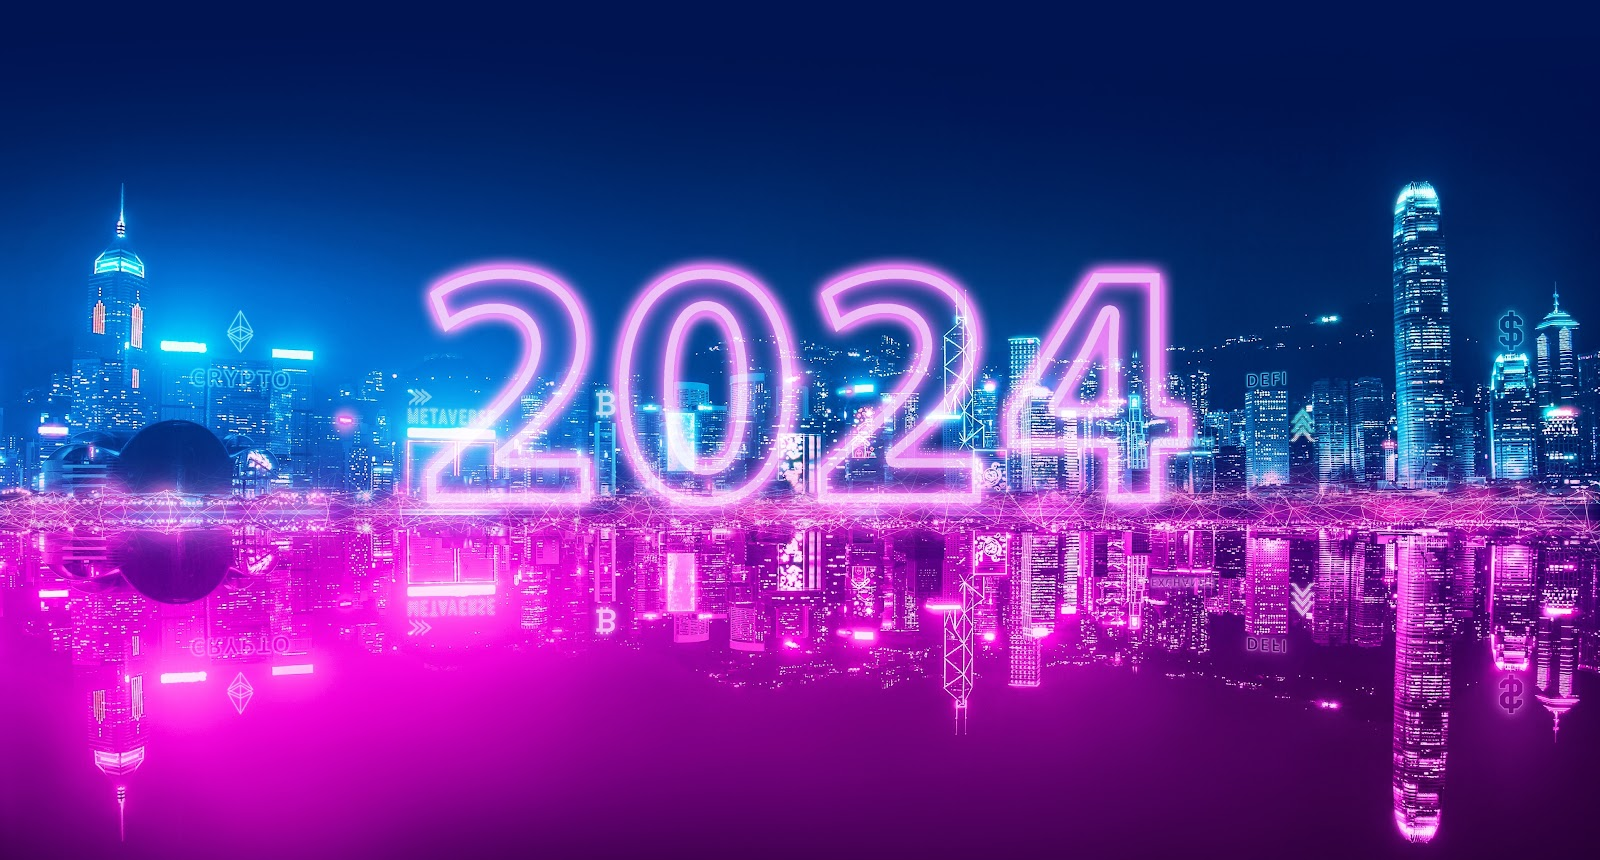 Which Cryptos Have the Most Potential in 2024? Top 3 Analyzed